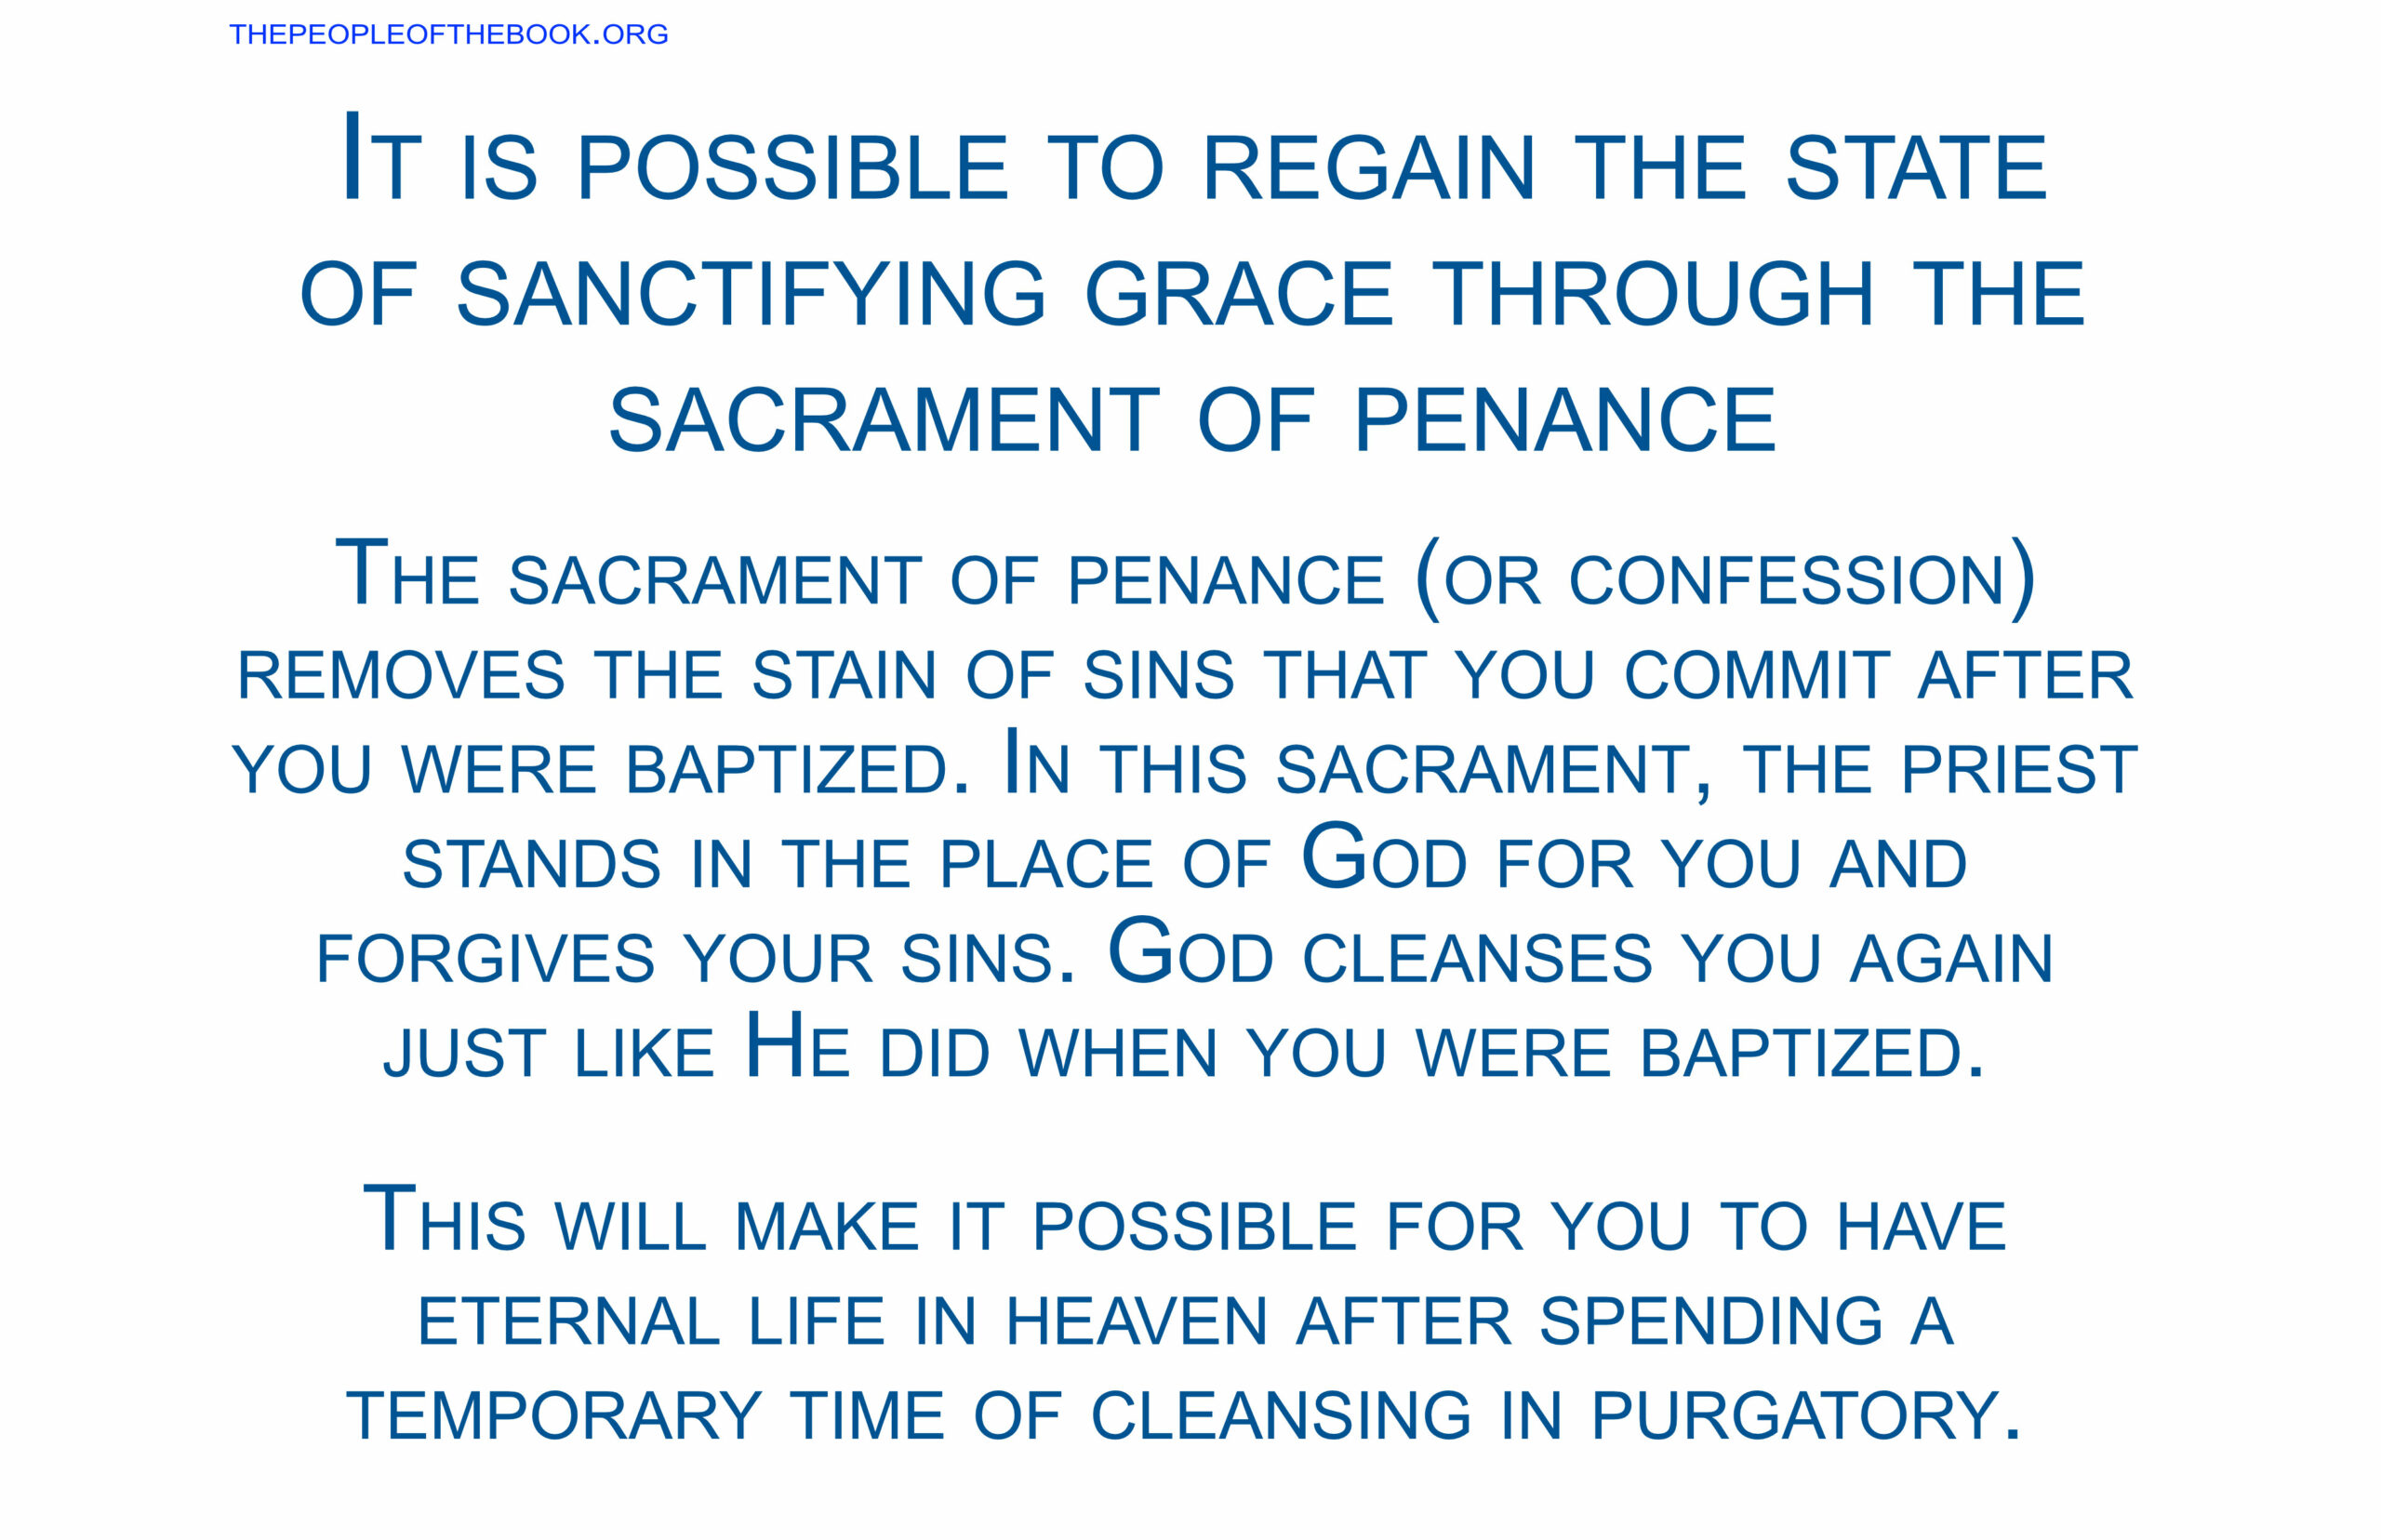 it is possible to regain the state of sanctifying grace through the sacrament of penance